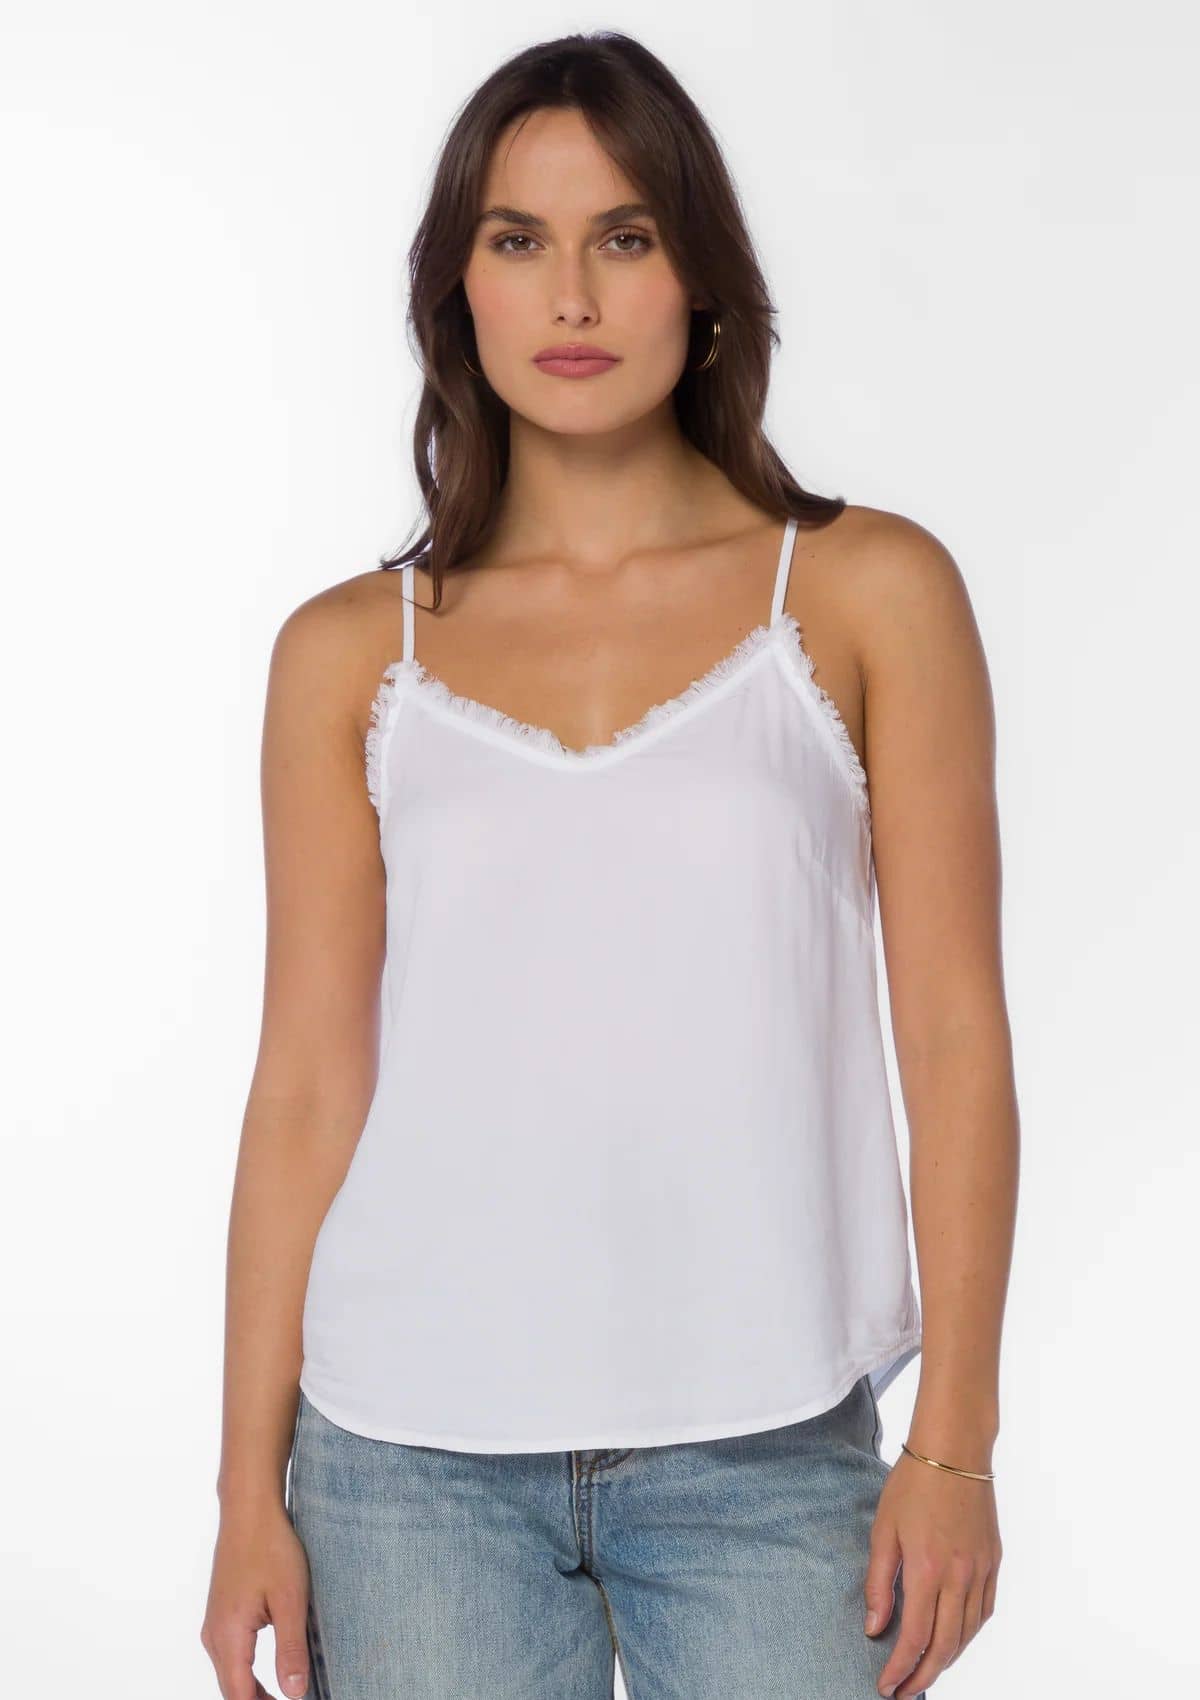 Camis-Casual Tops-clothing-Ruby Jane.